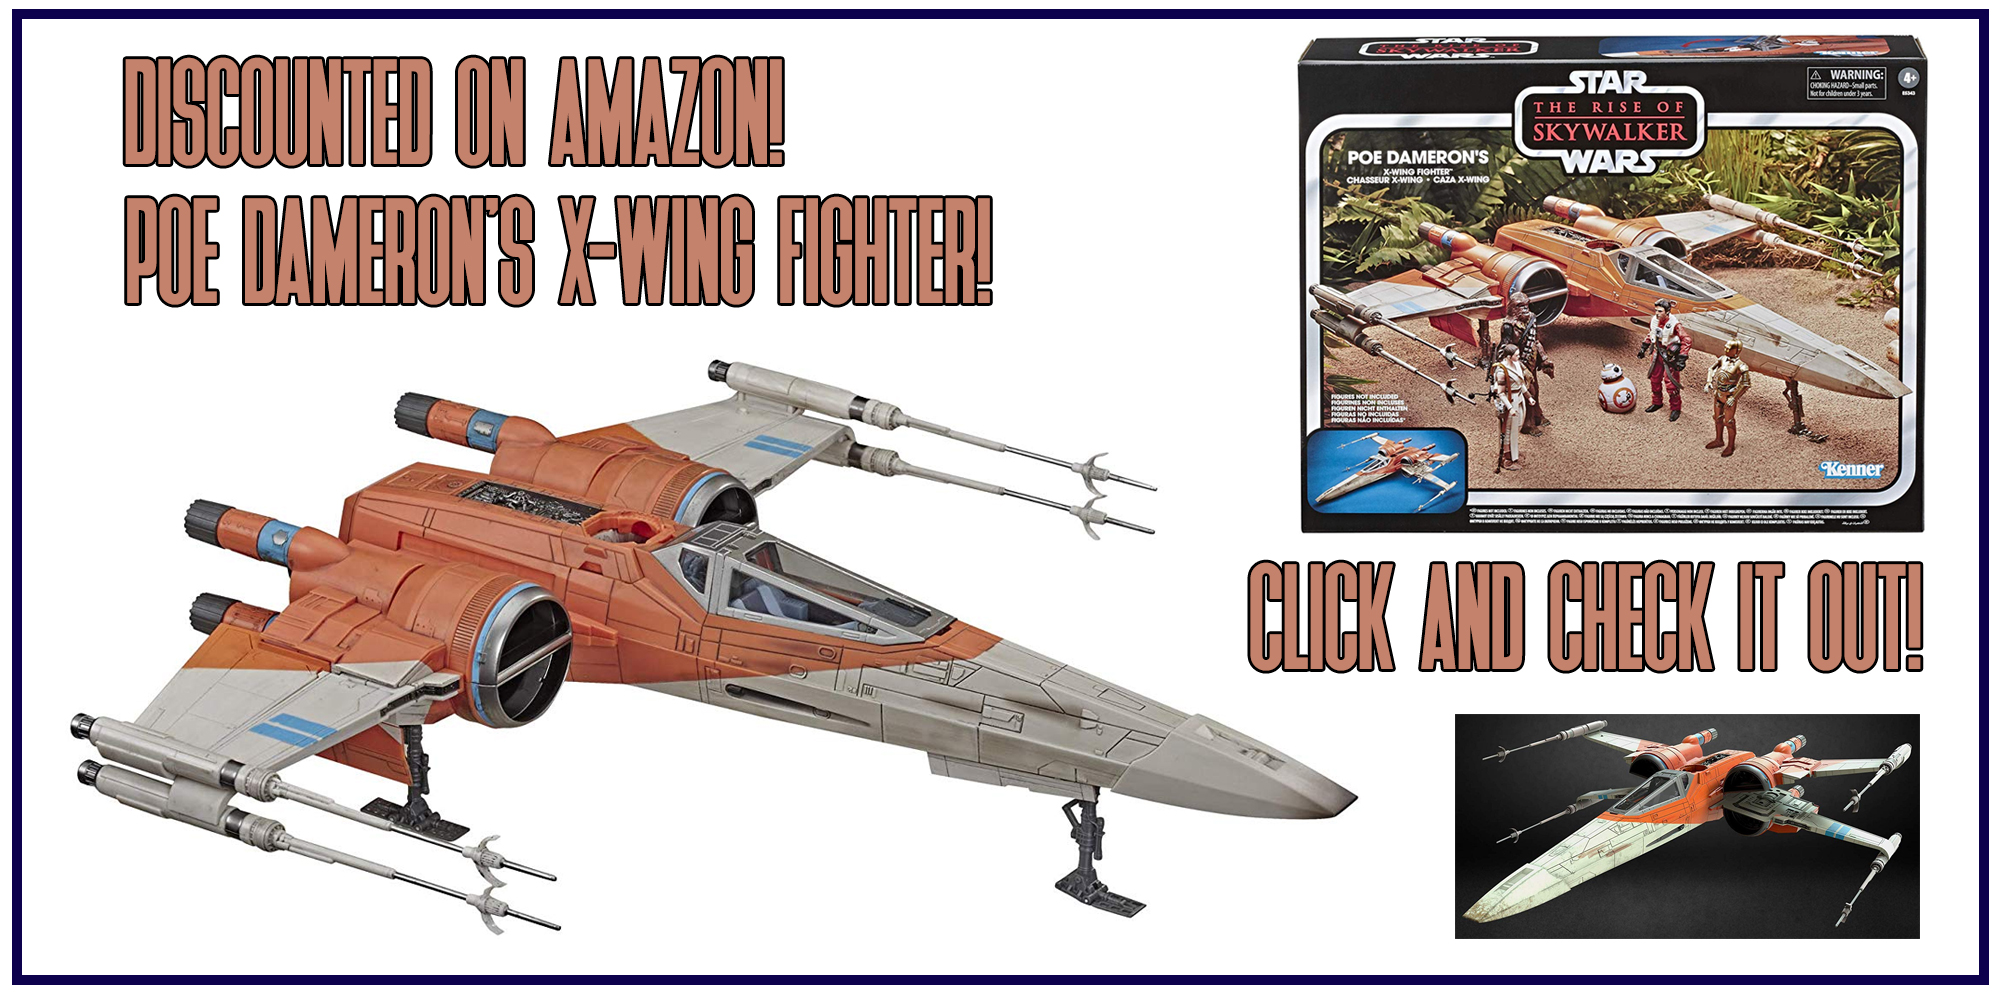 Poe Dameron's X-Wing Fighter $10 Off At Amazon!